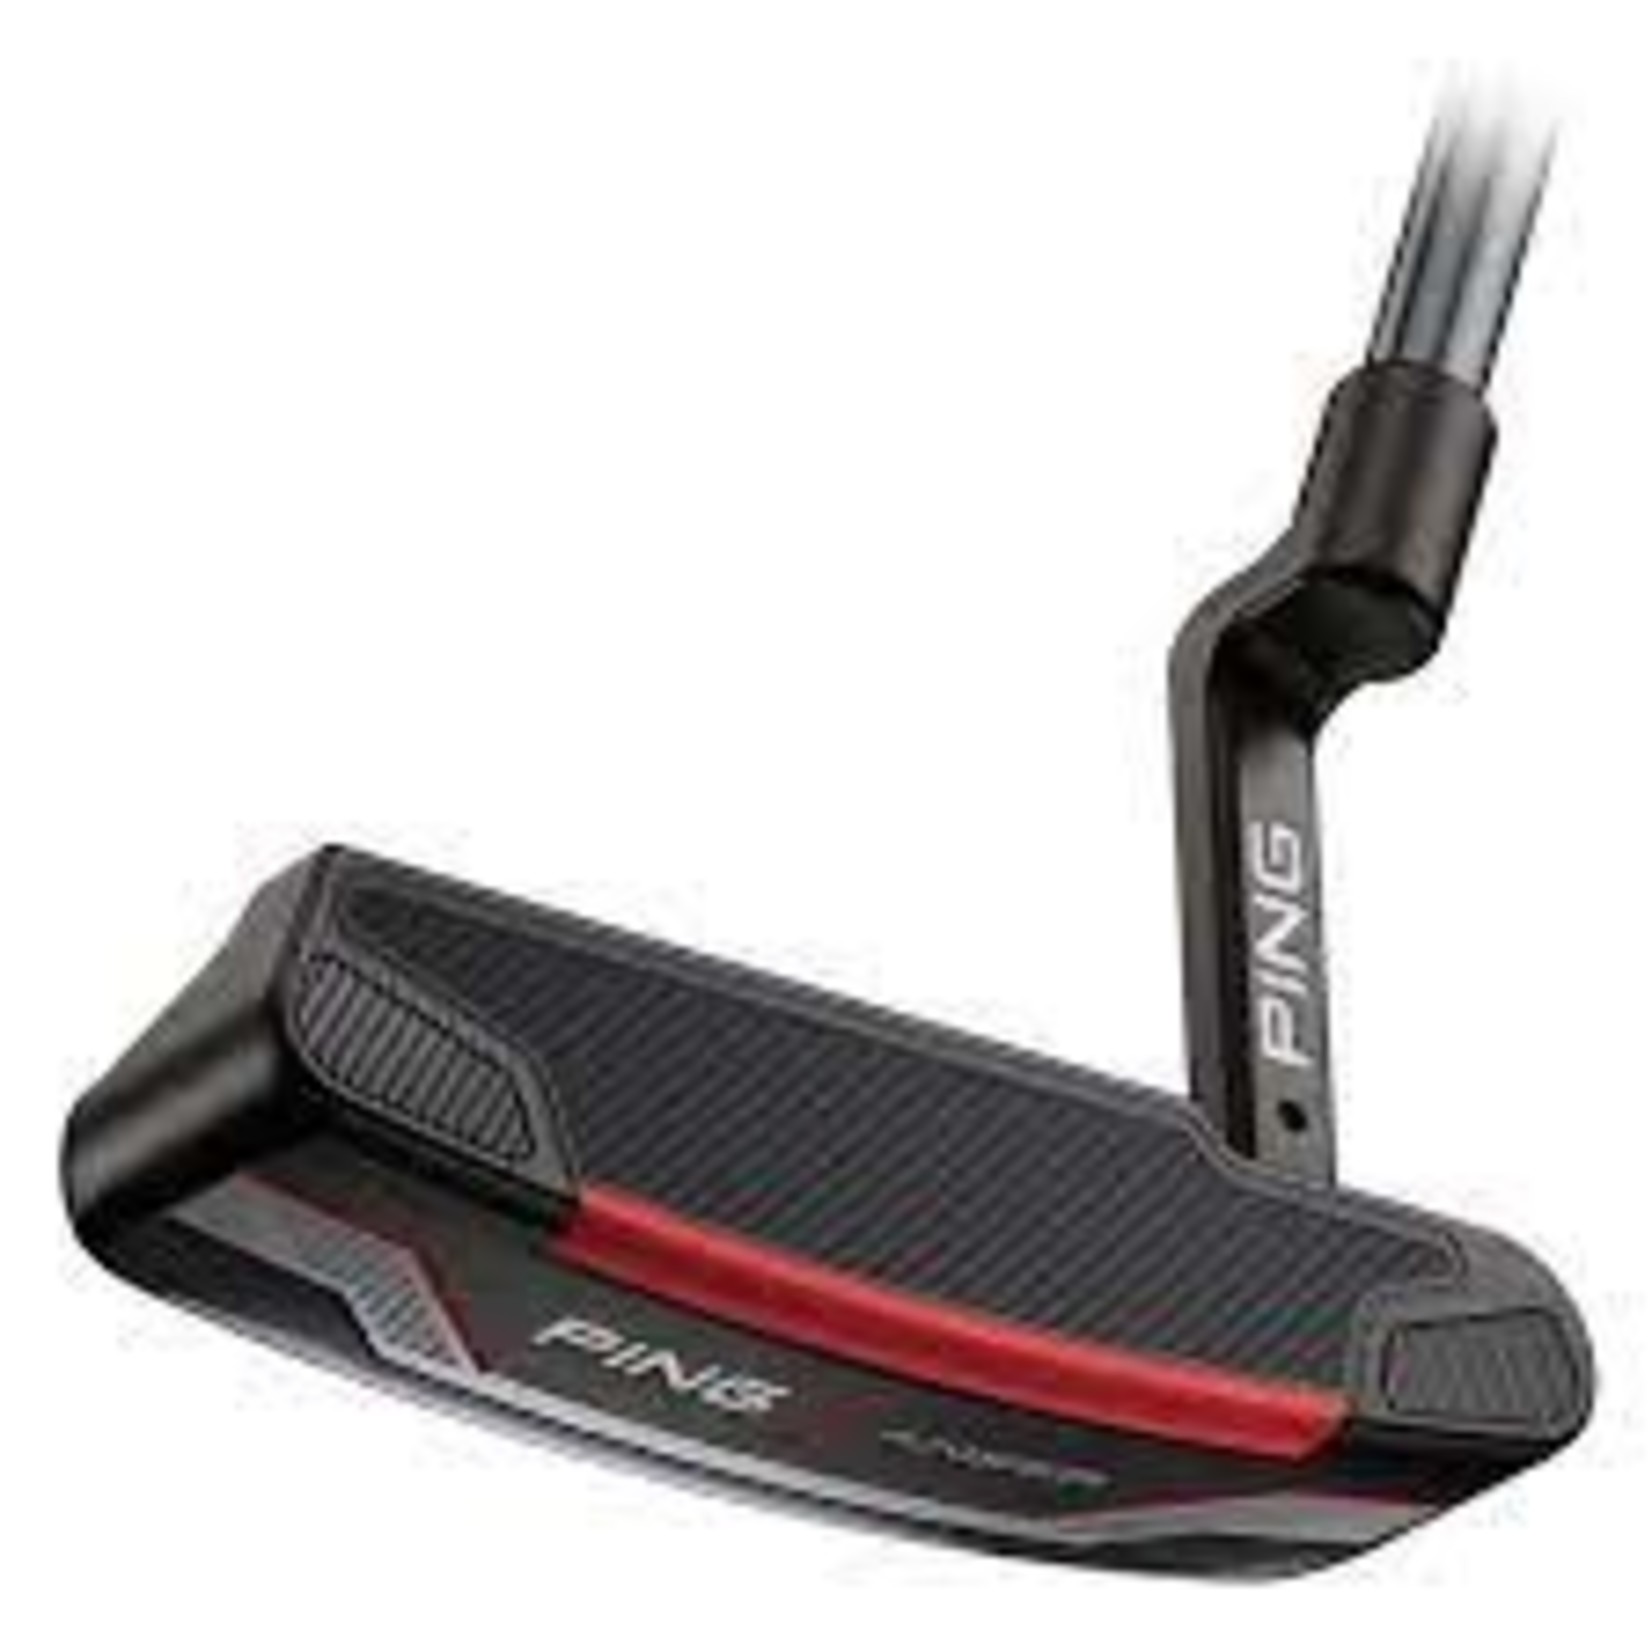 PING Ping 2021 Series Putters